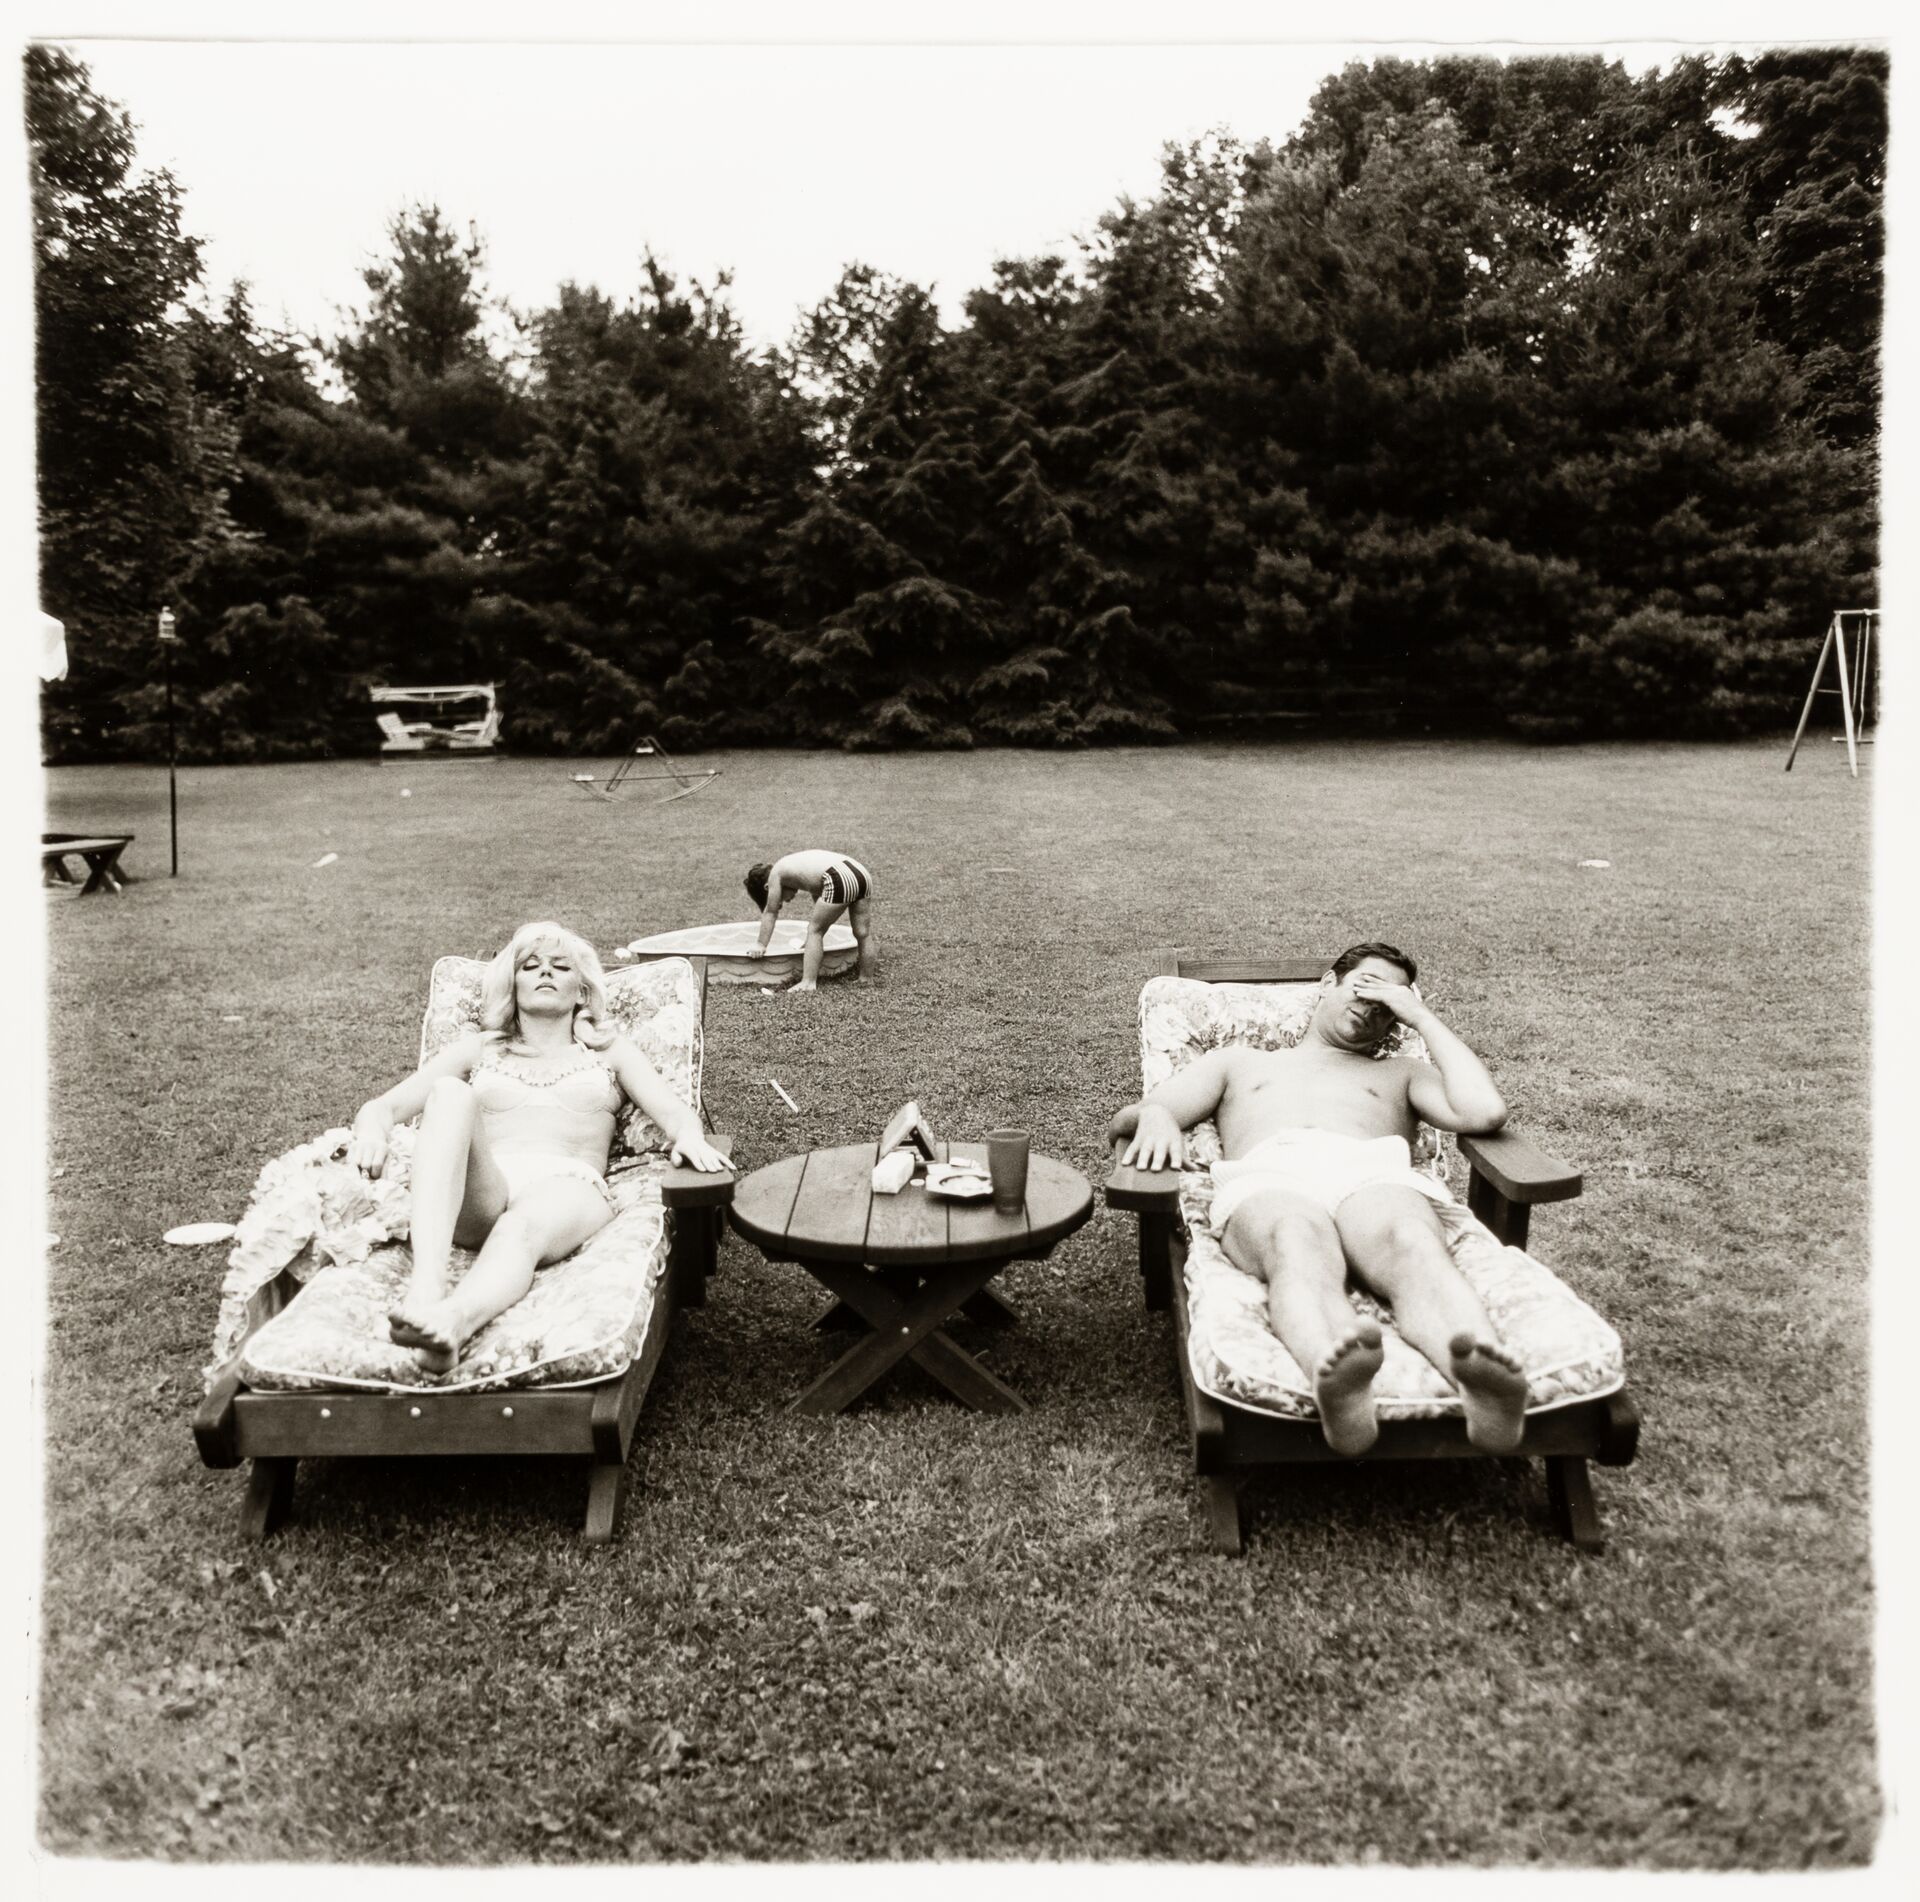 A family on their lawn one Sunday in Westchester, N.Y. 1968 © The Estate of Diane Arbus.